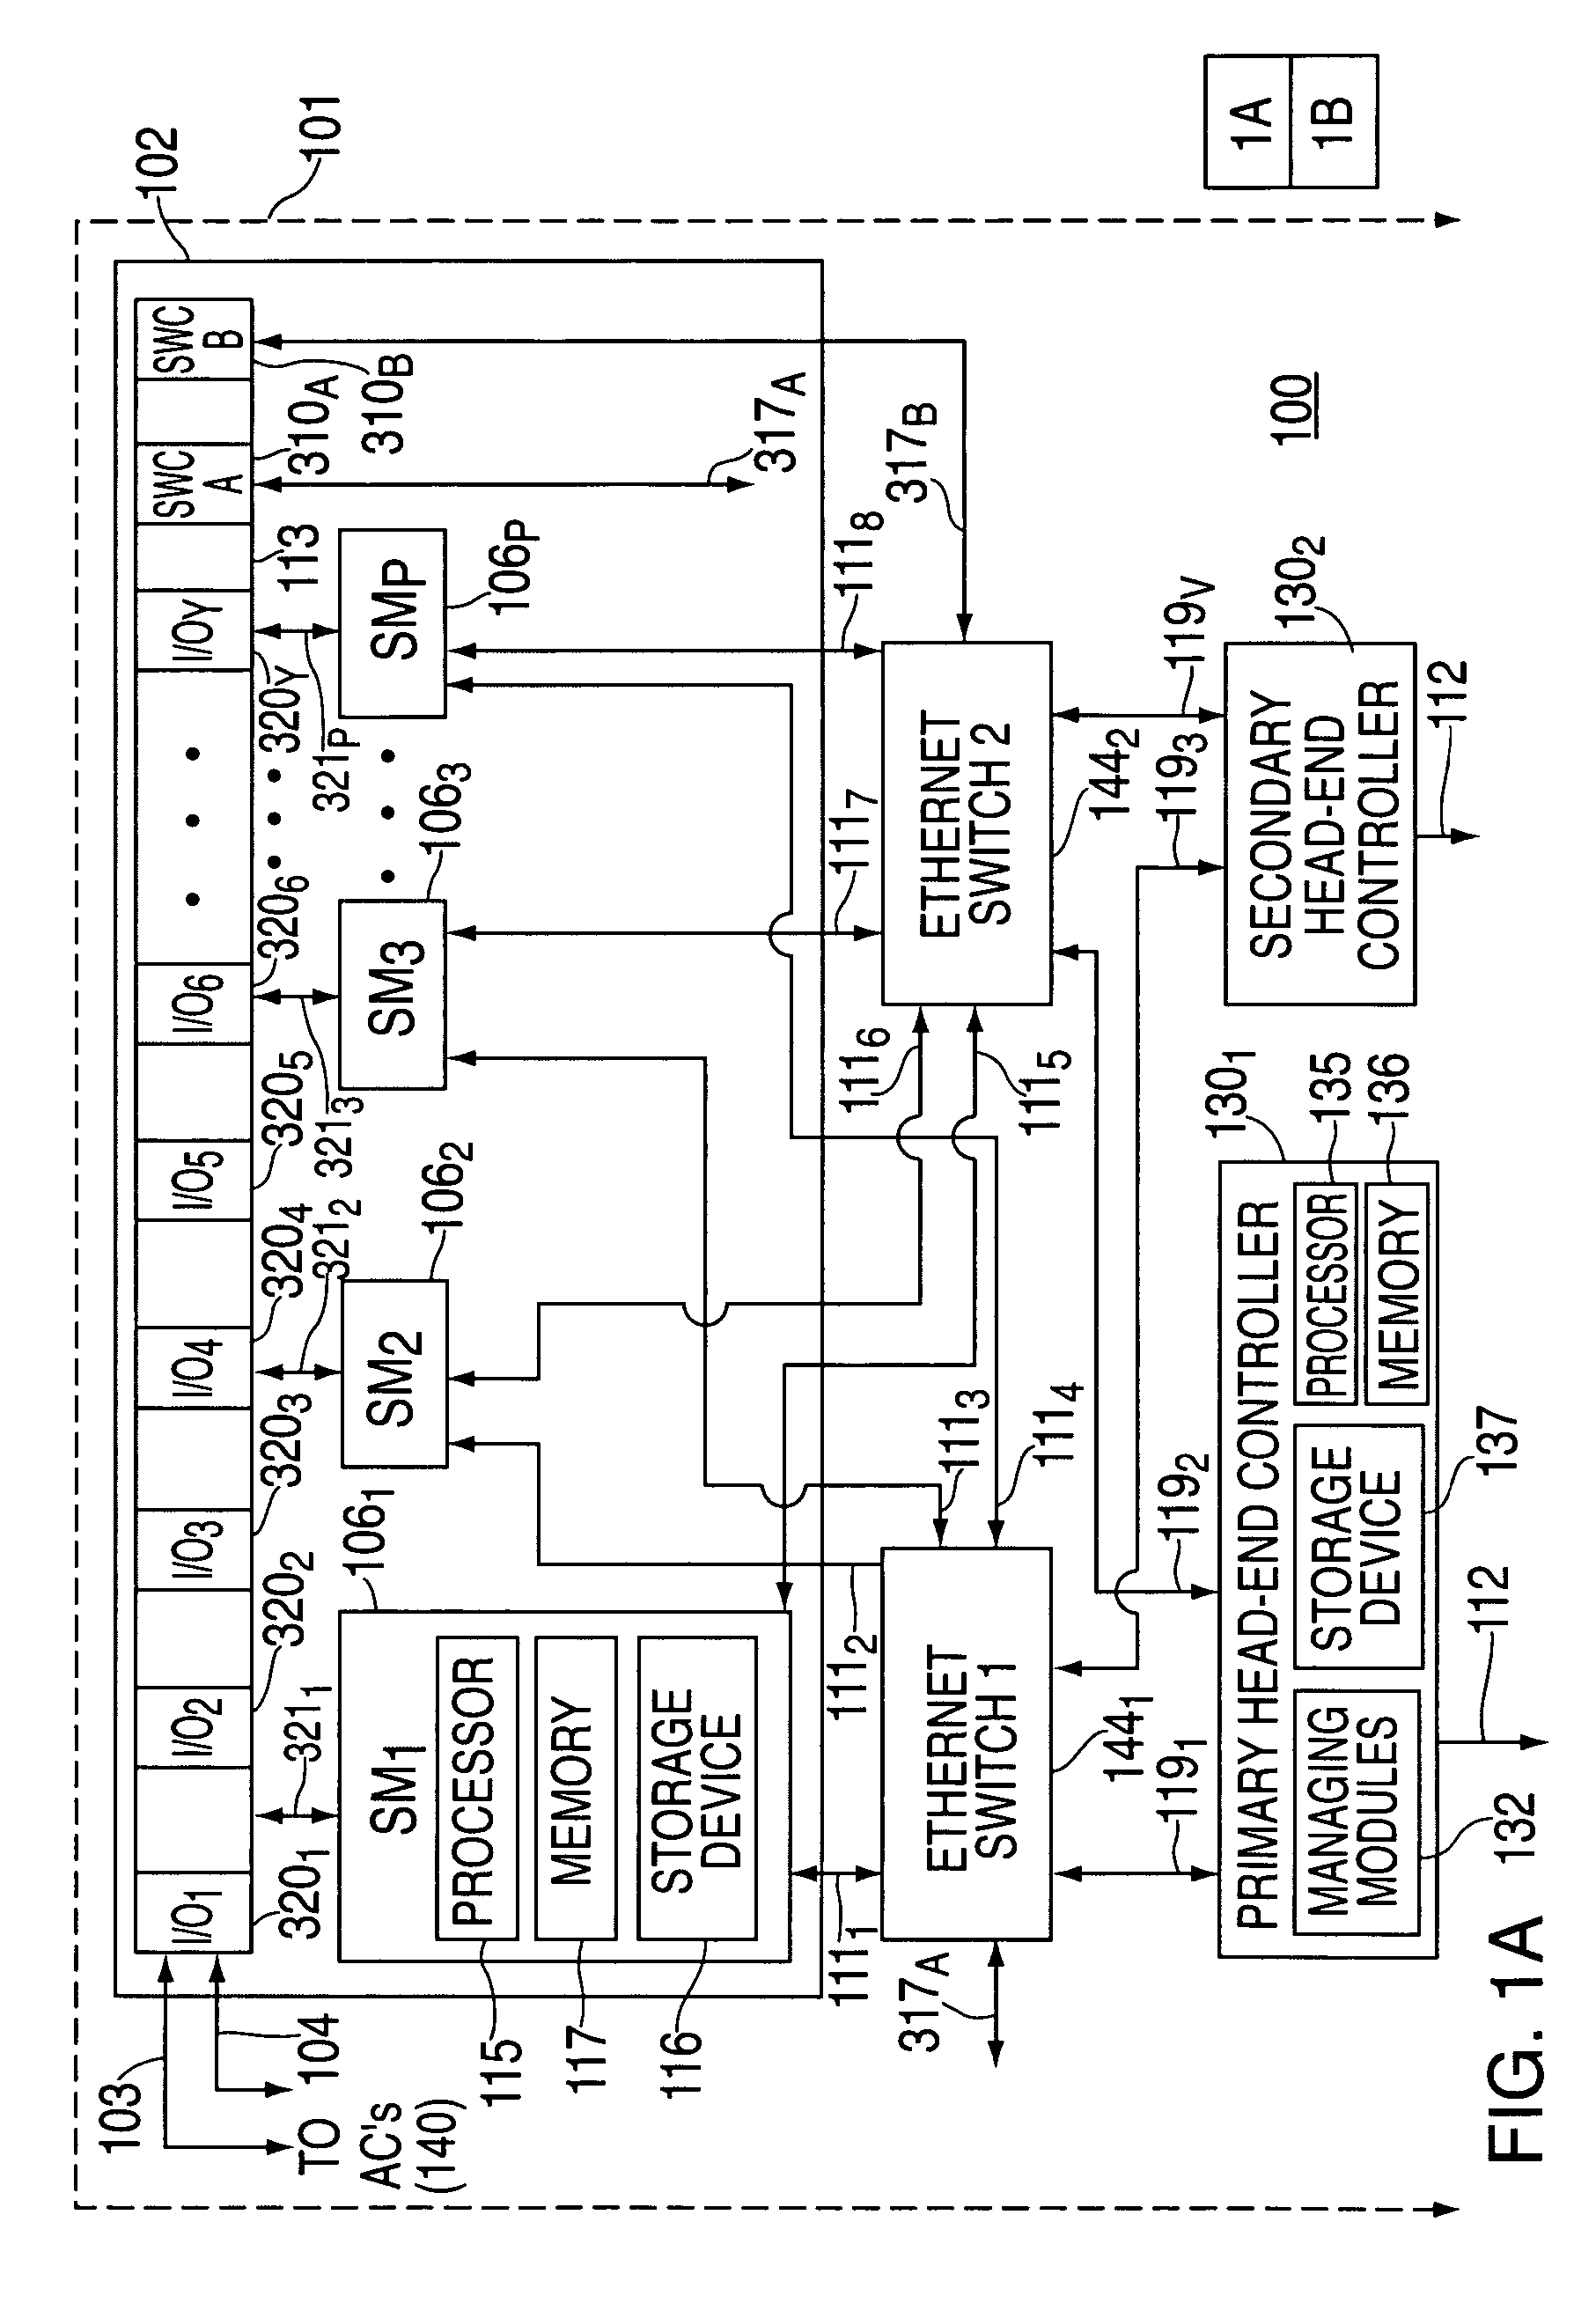 Method and apparatus of load sharing and improving fault tolerance in an interactive video distribution system